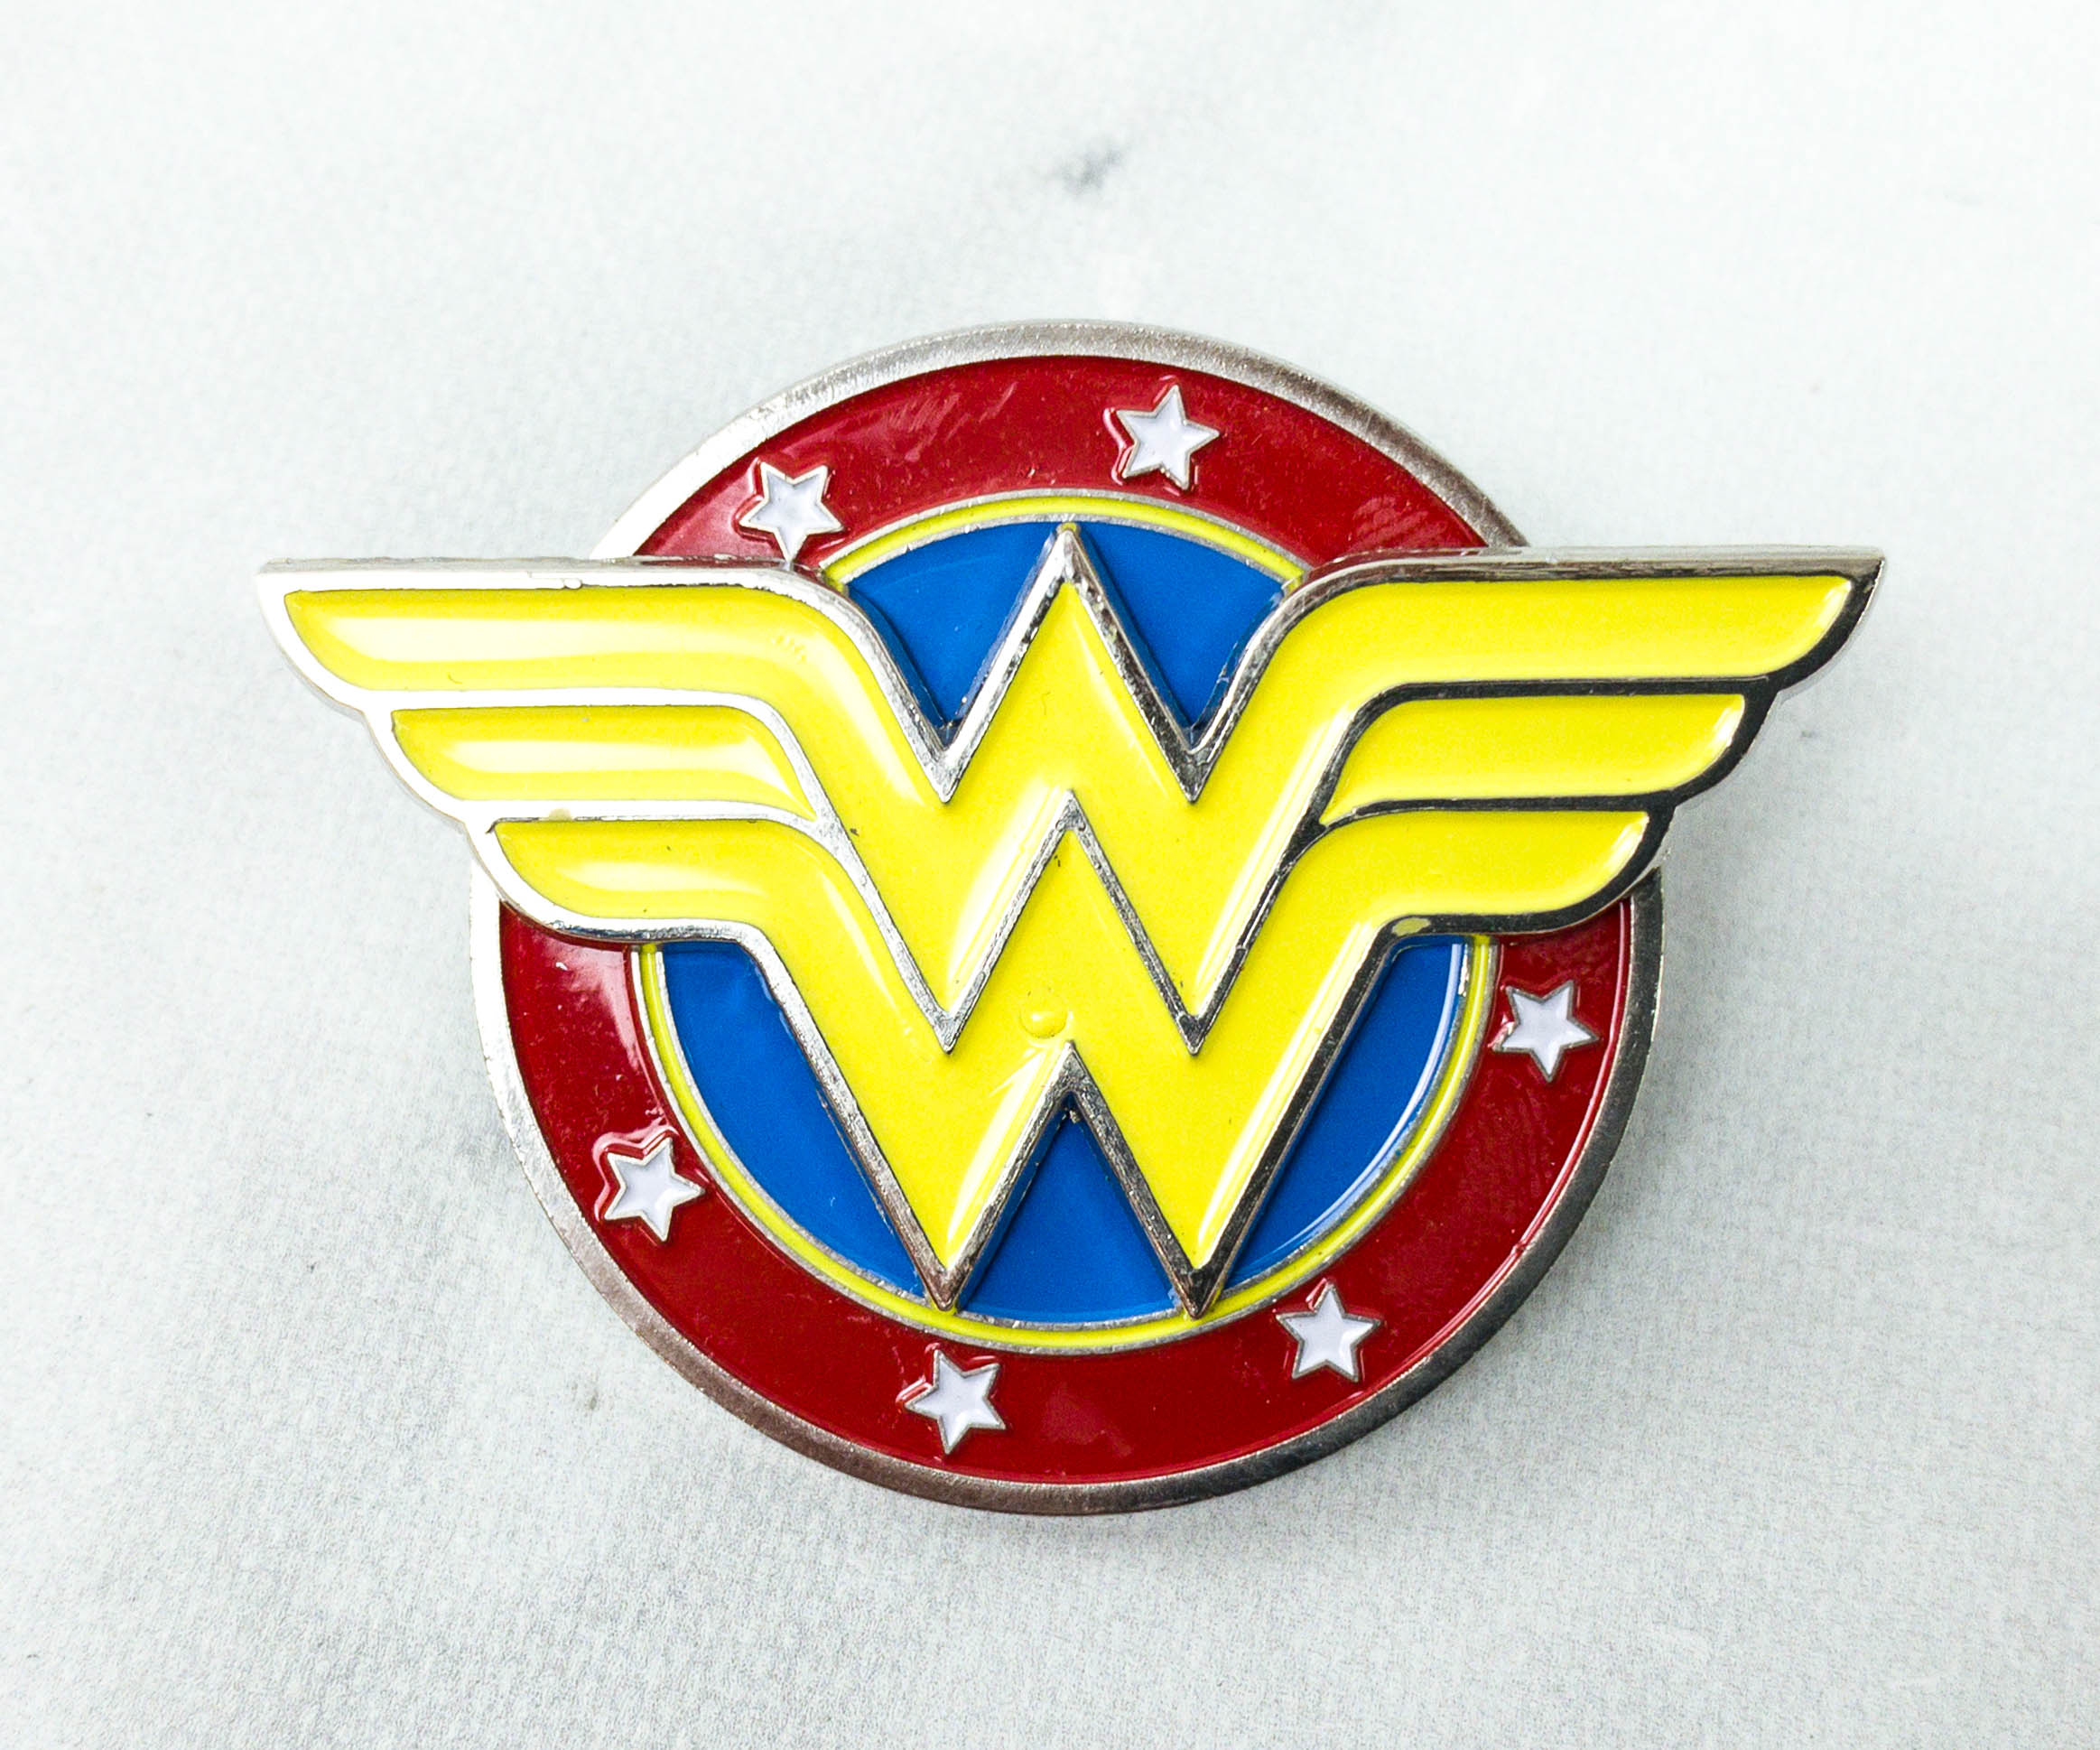 Wonder Woman - Official Save The World / Premium Stationery Set / Stationery